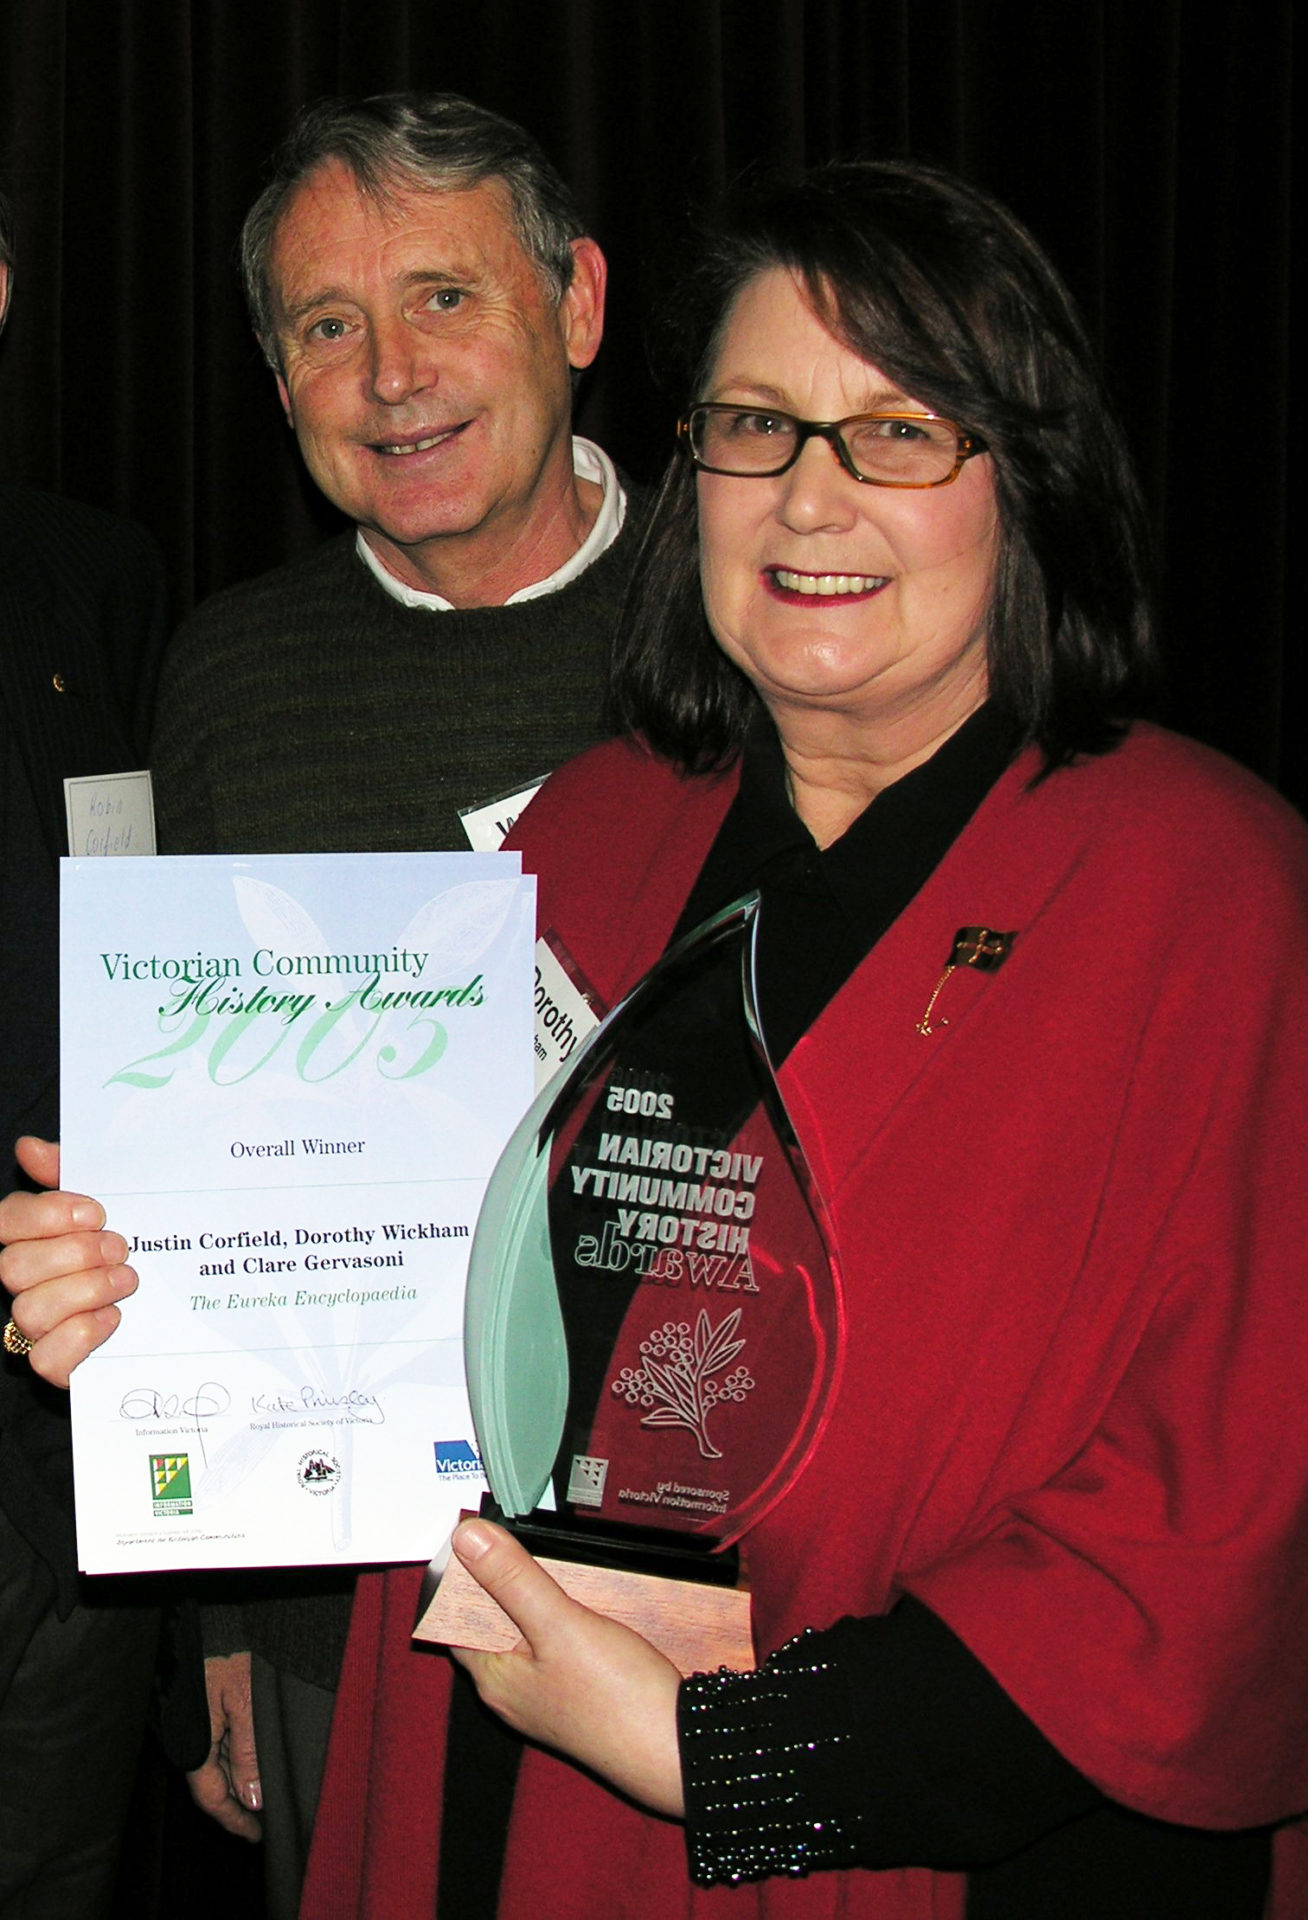 The Eureka Encyclopaedia wins the overall prize in the Victorian Community Heritage Awards 2005